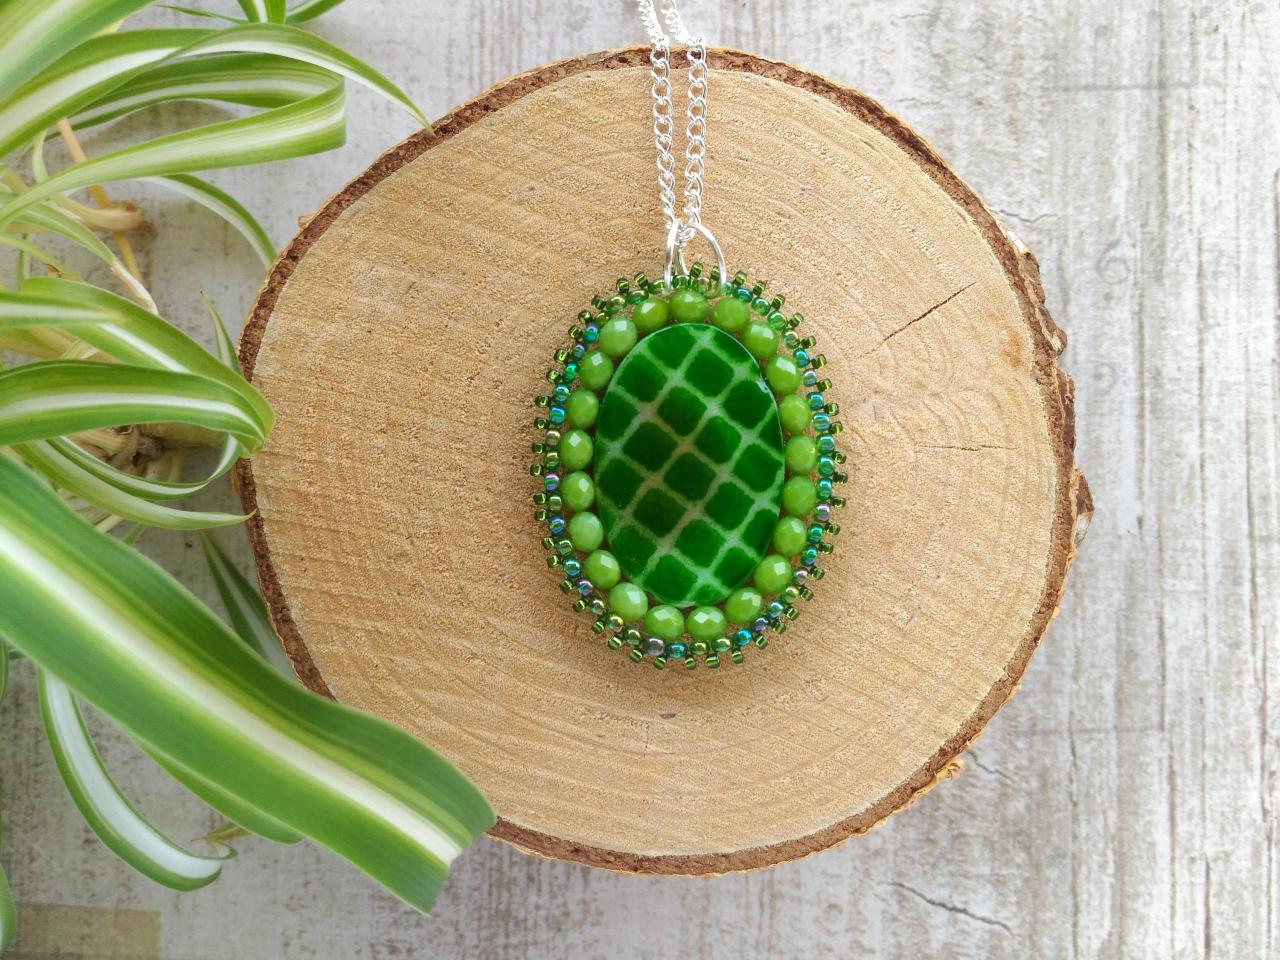 Green Long Chain Necklace, Green Shell And Silver Chain Pendant, Brick Stick Bead Woven Pendant, Bright Green Pendant, Green Boho Jewelry